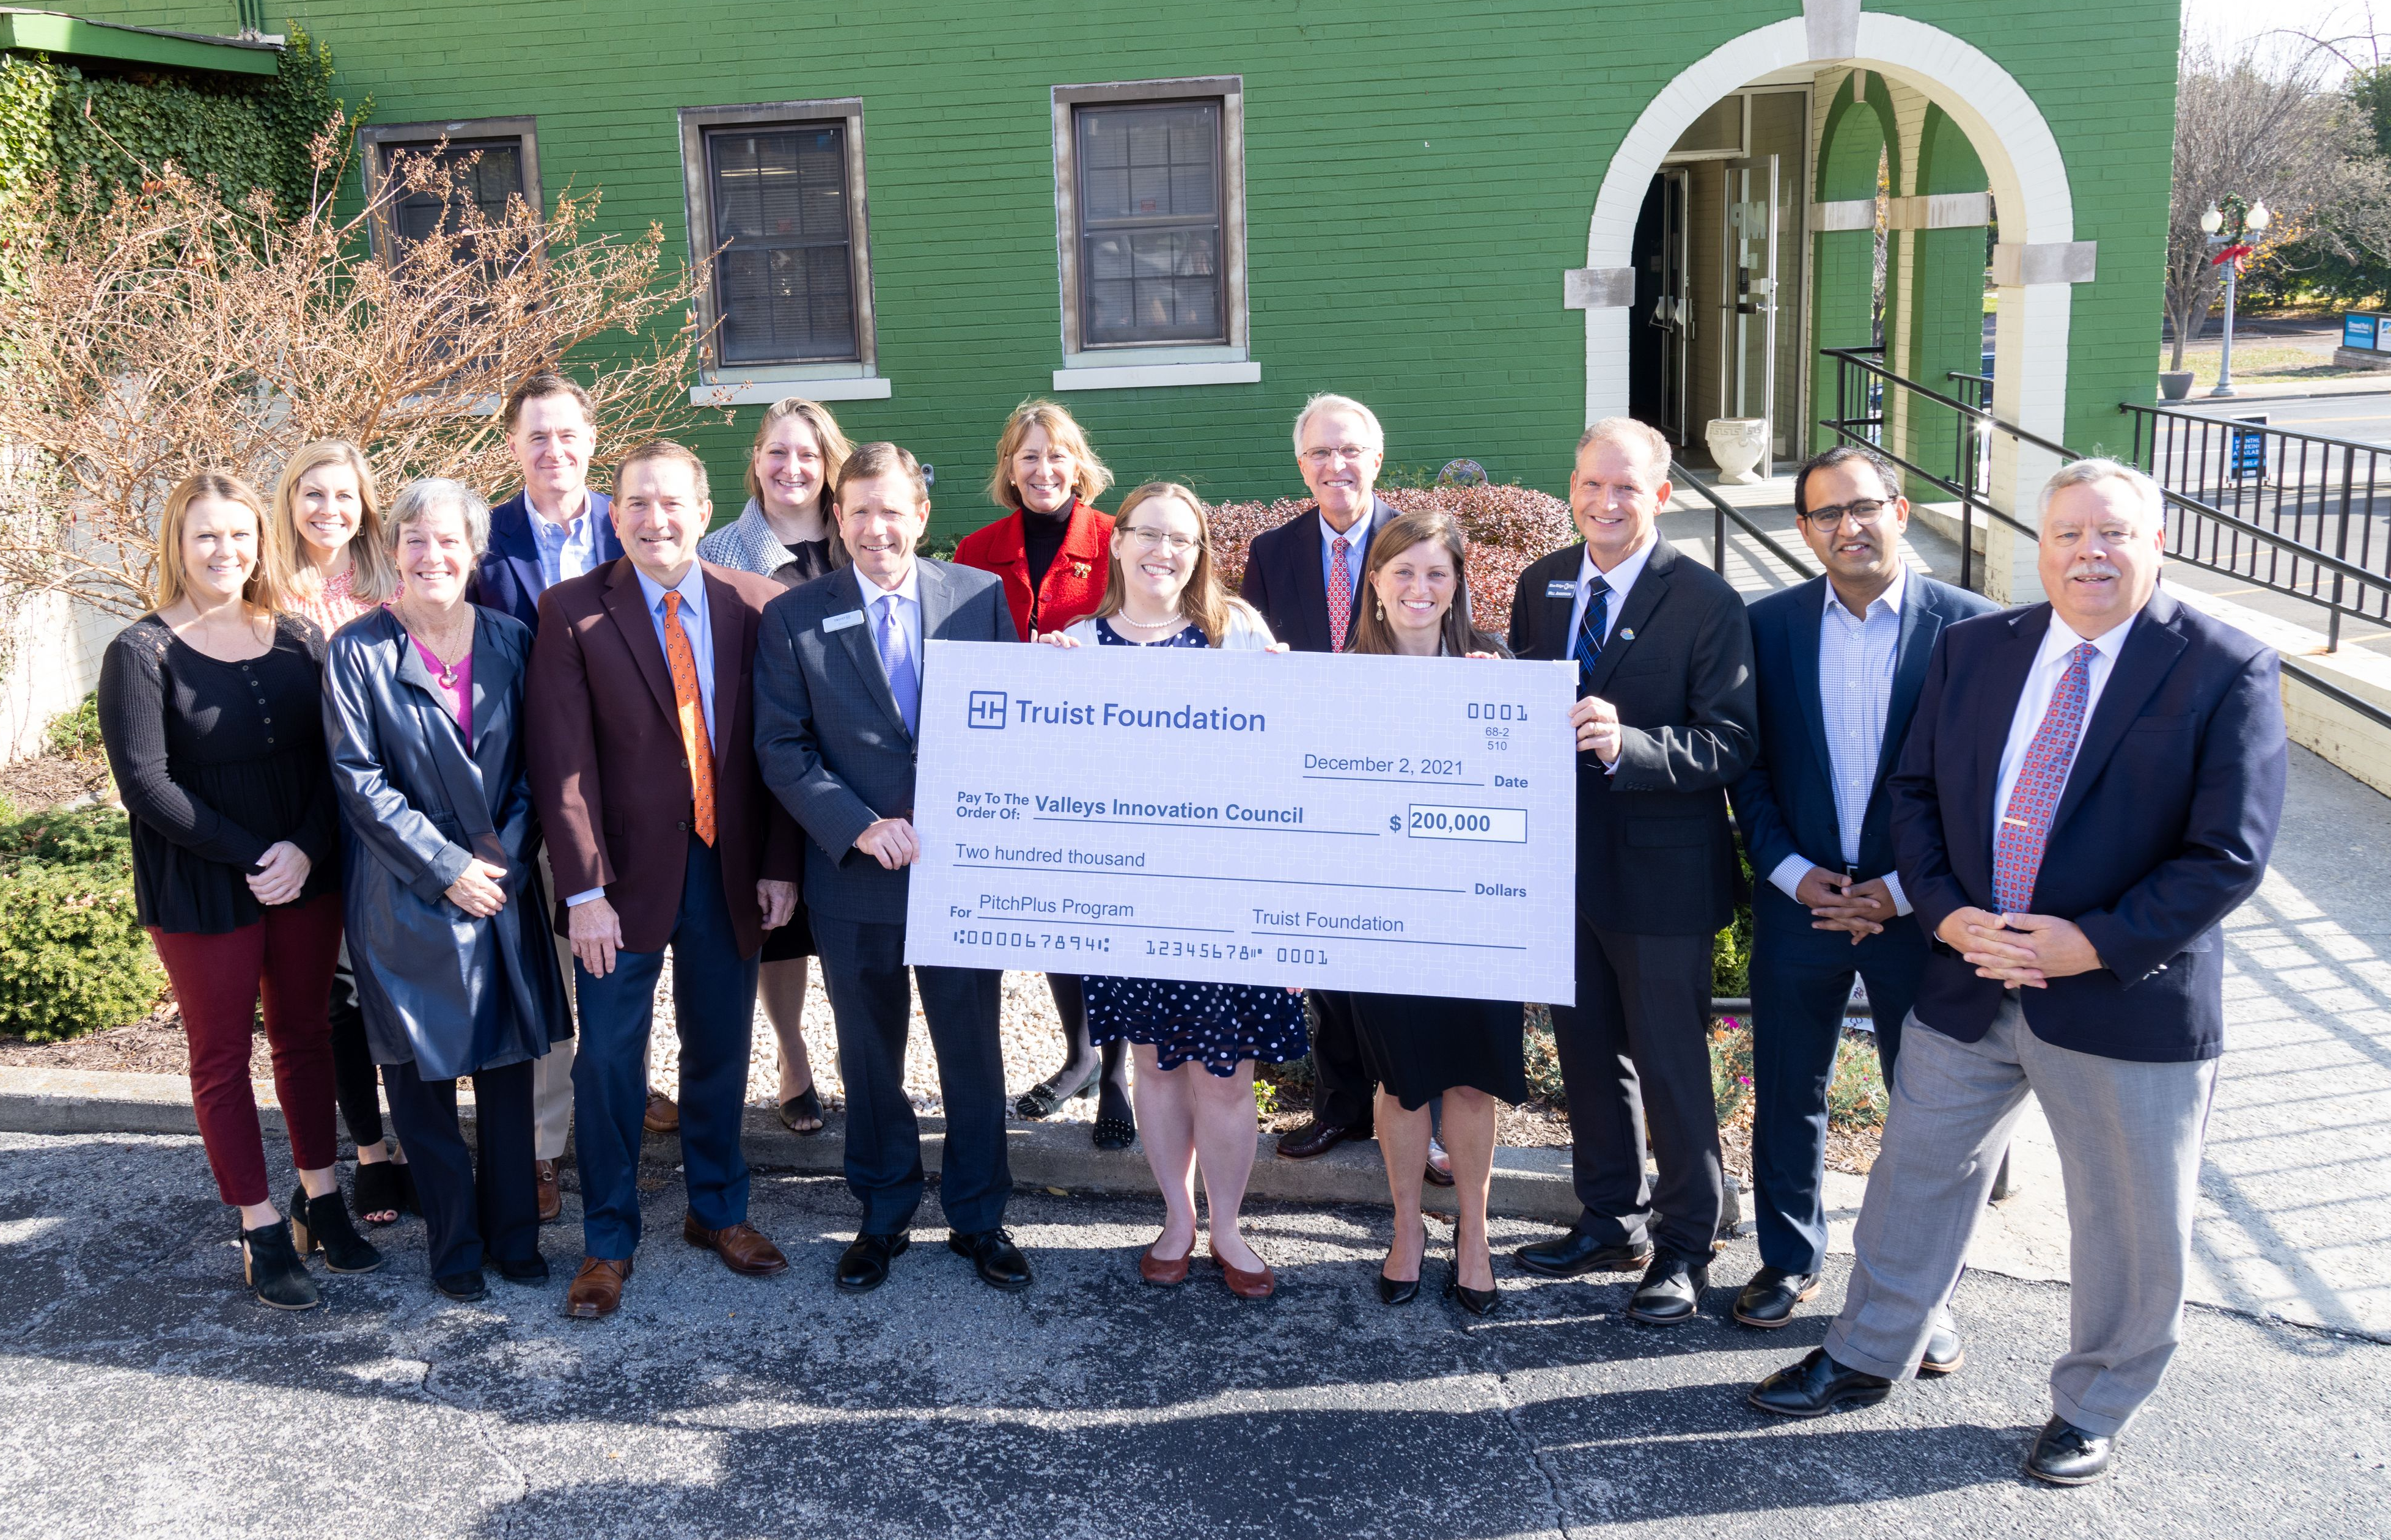 Valleys Innovation Council Receives $200,000 Grant from Truist Foundation to Support PitchPlus Program